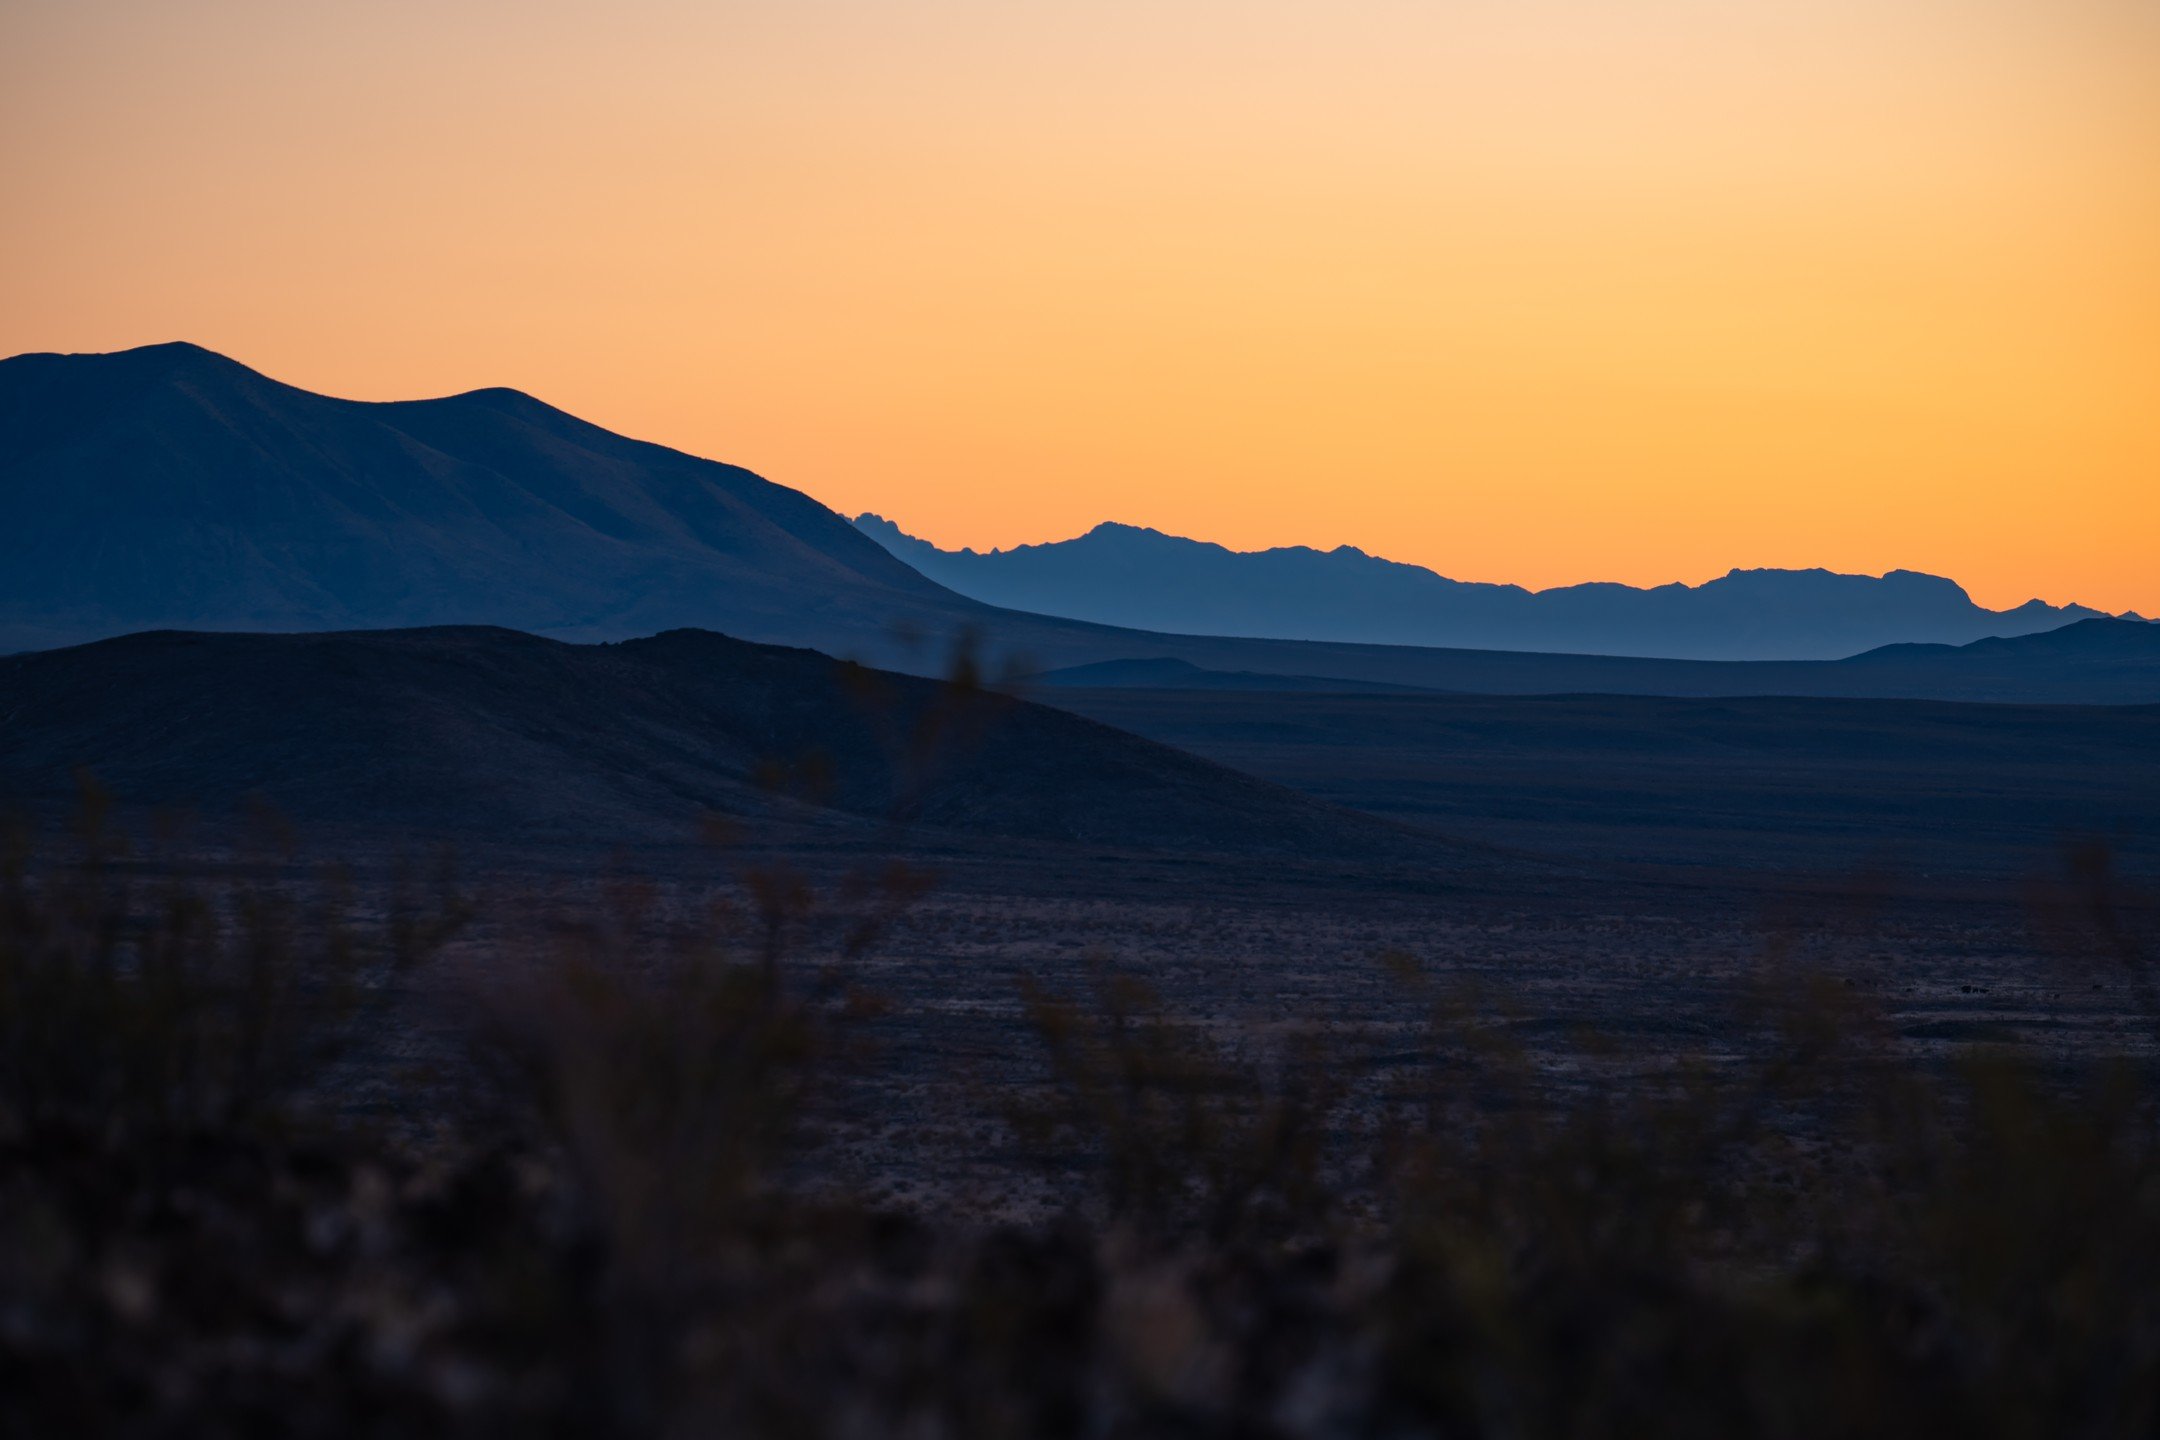 Feeling western this morning. So here's sunrise from a long-dormant New Mexico volcanic cinder cone. #freewheelstudios #landscapephotography #newmexico